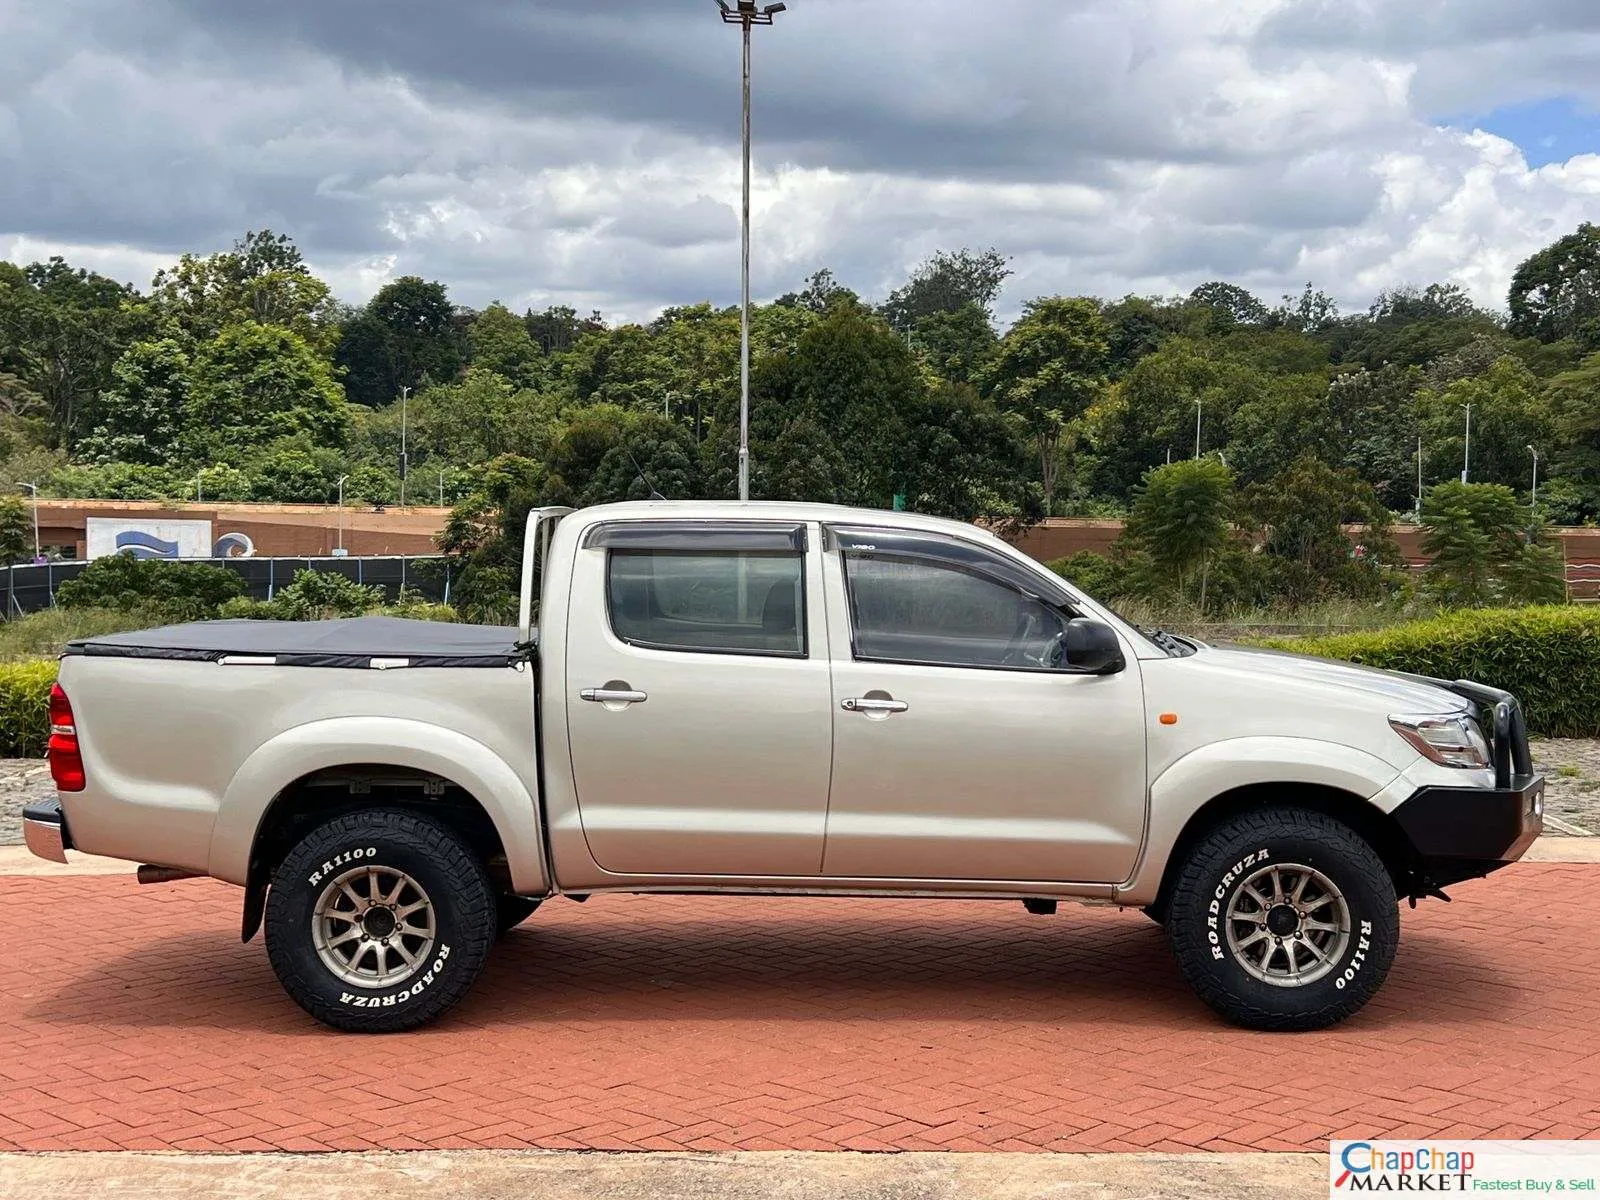 Cars For Sale Cars-Toyota Hilux locally Double cab You Pay 30% Deposit trade in OK hire purchase installments Kenya cabin